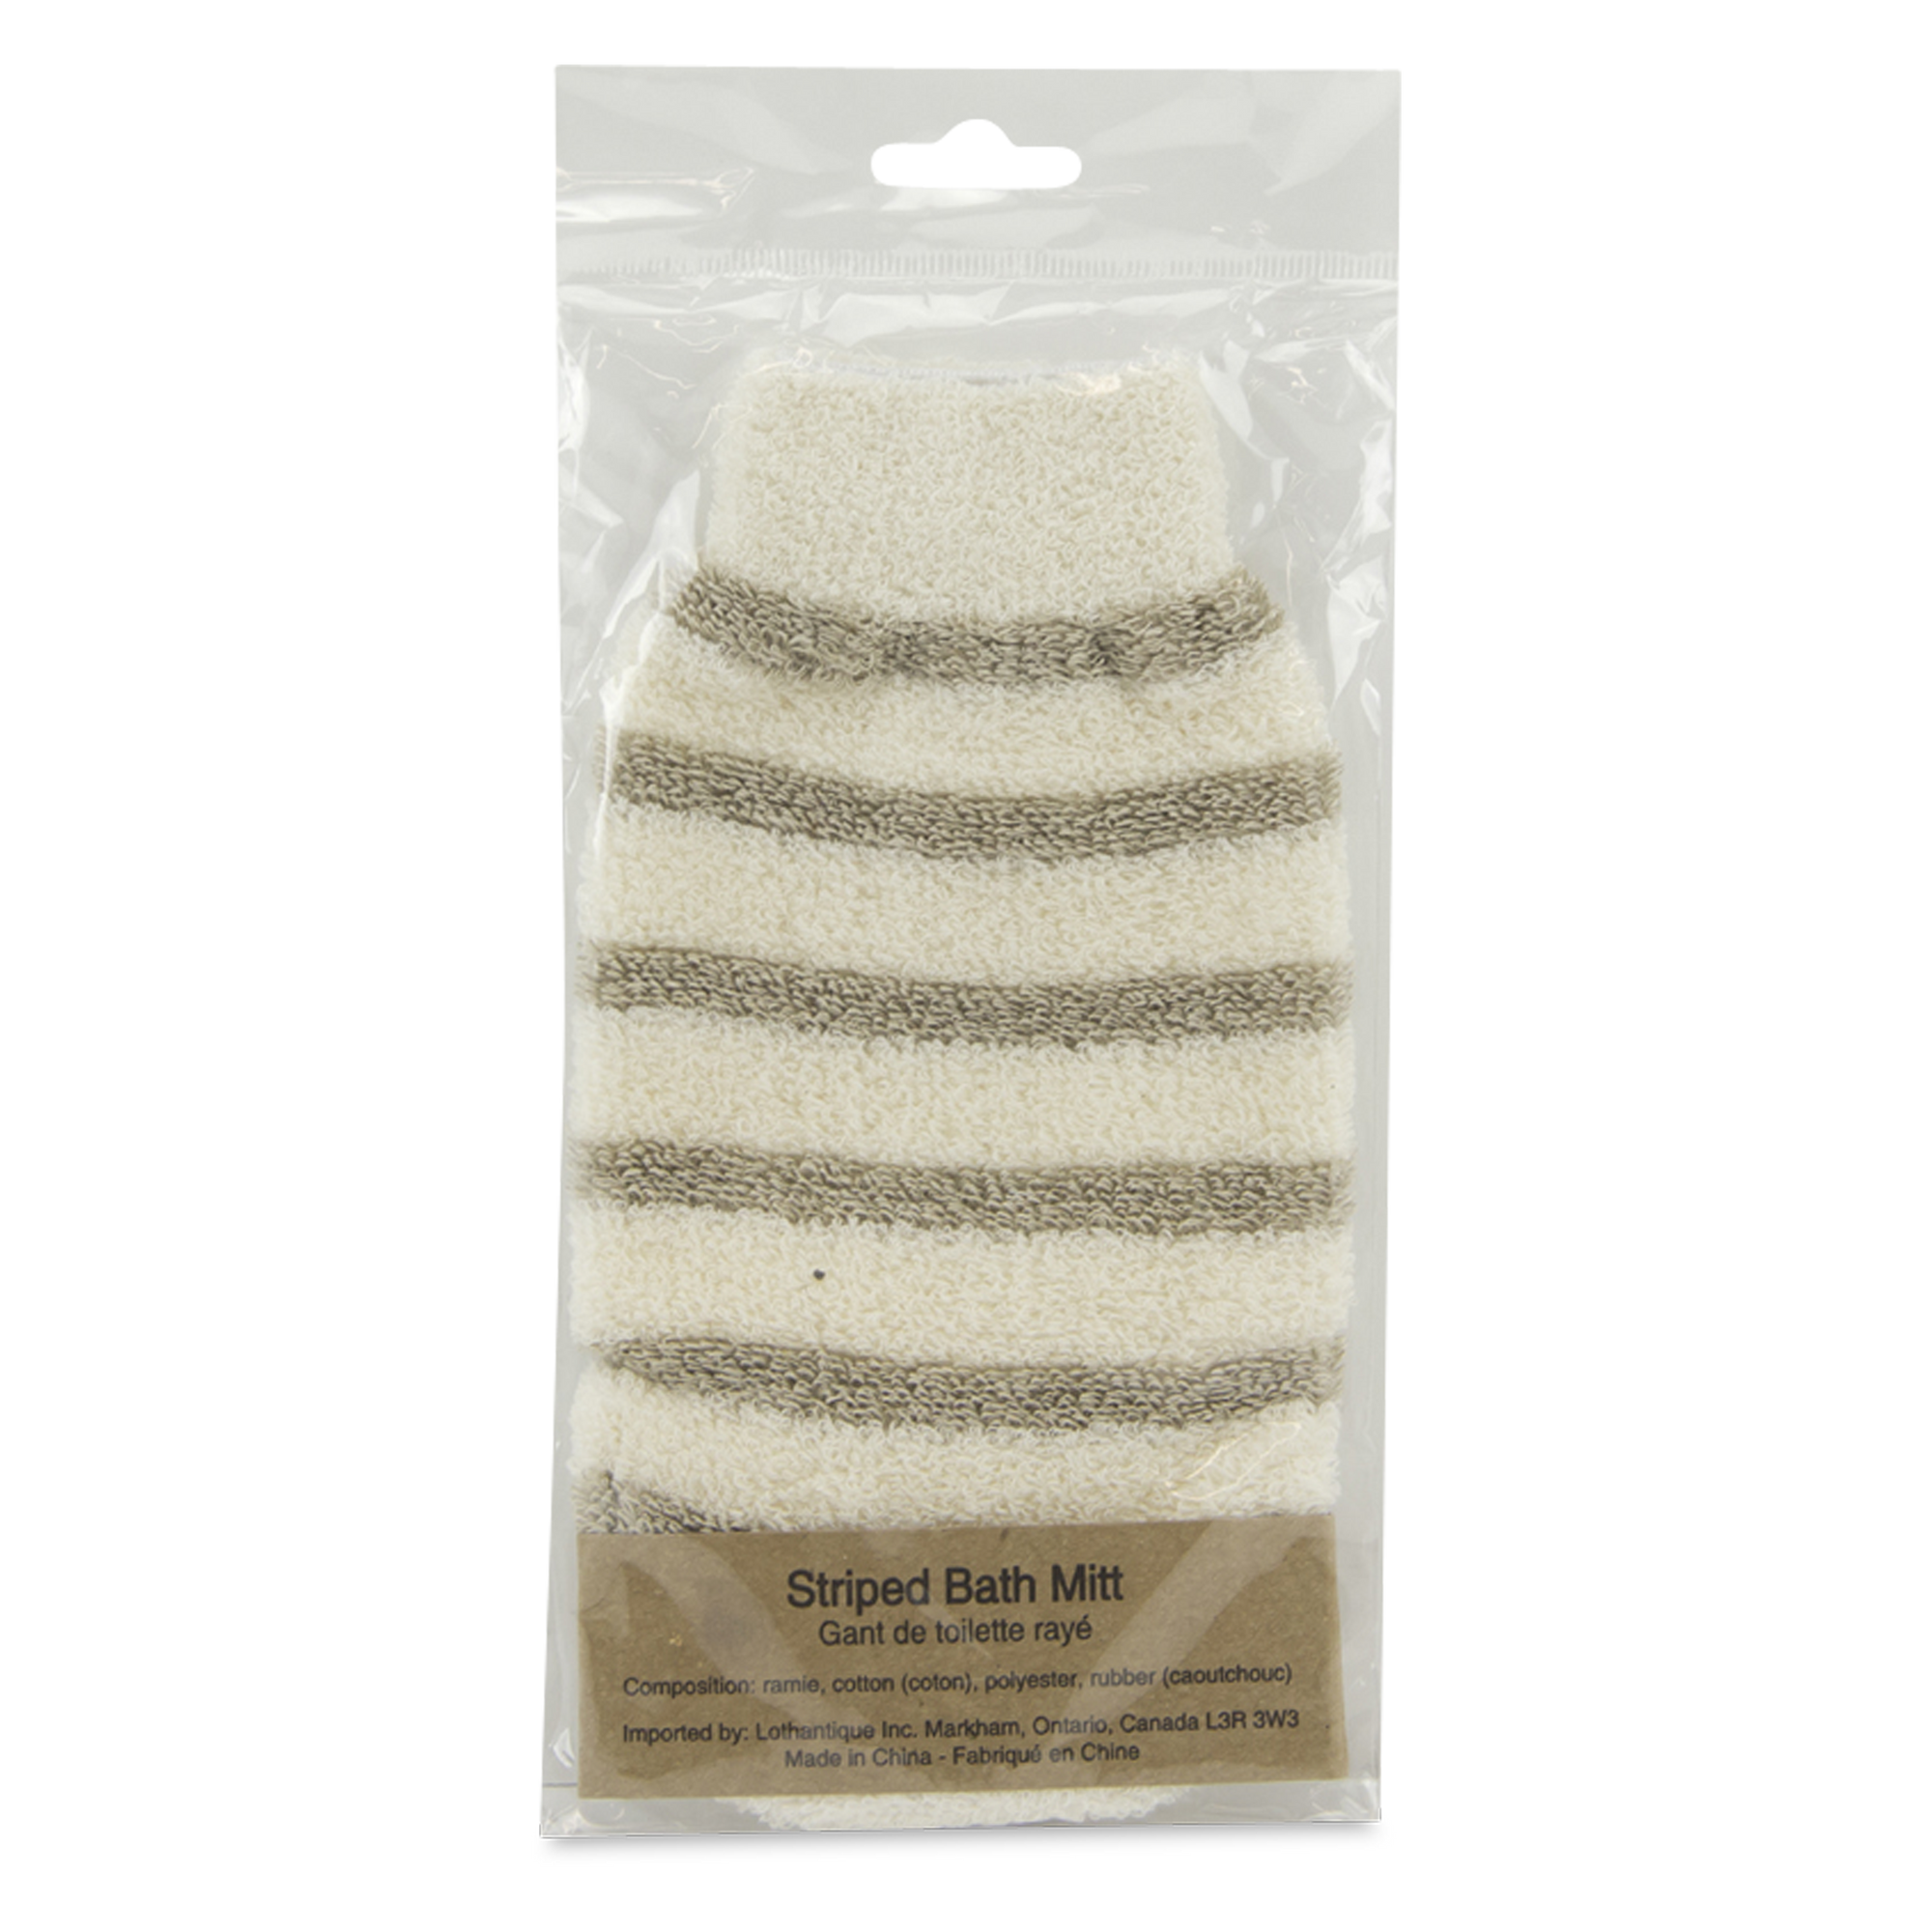 Bath mitt is made of ramie, cotton, polyester and rubber.